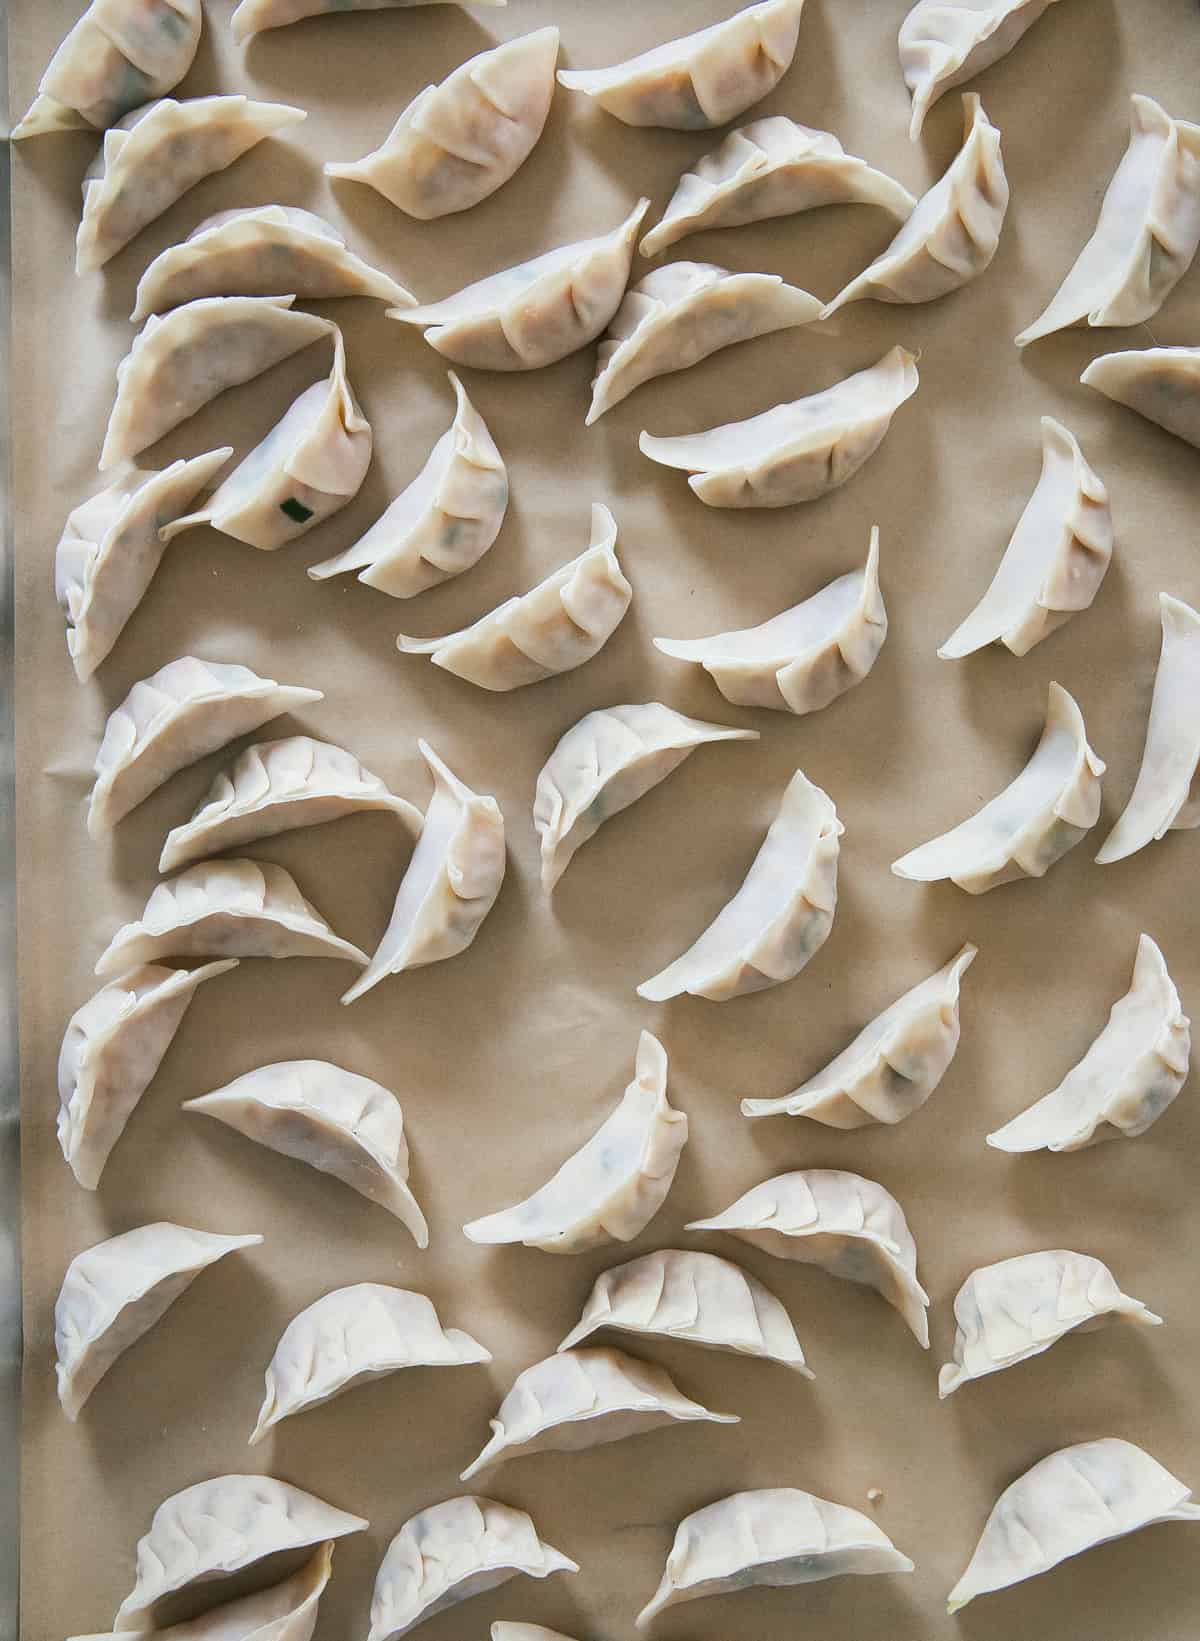 Potstickers on baking sheet, pre-cooked. 